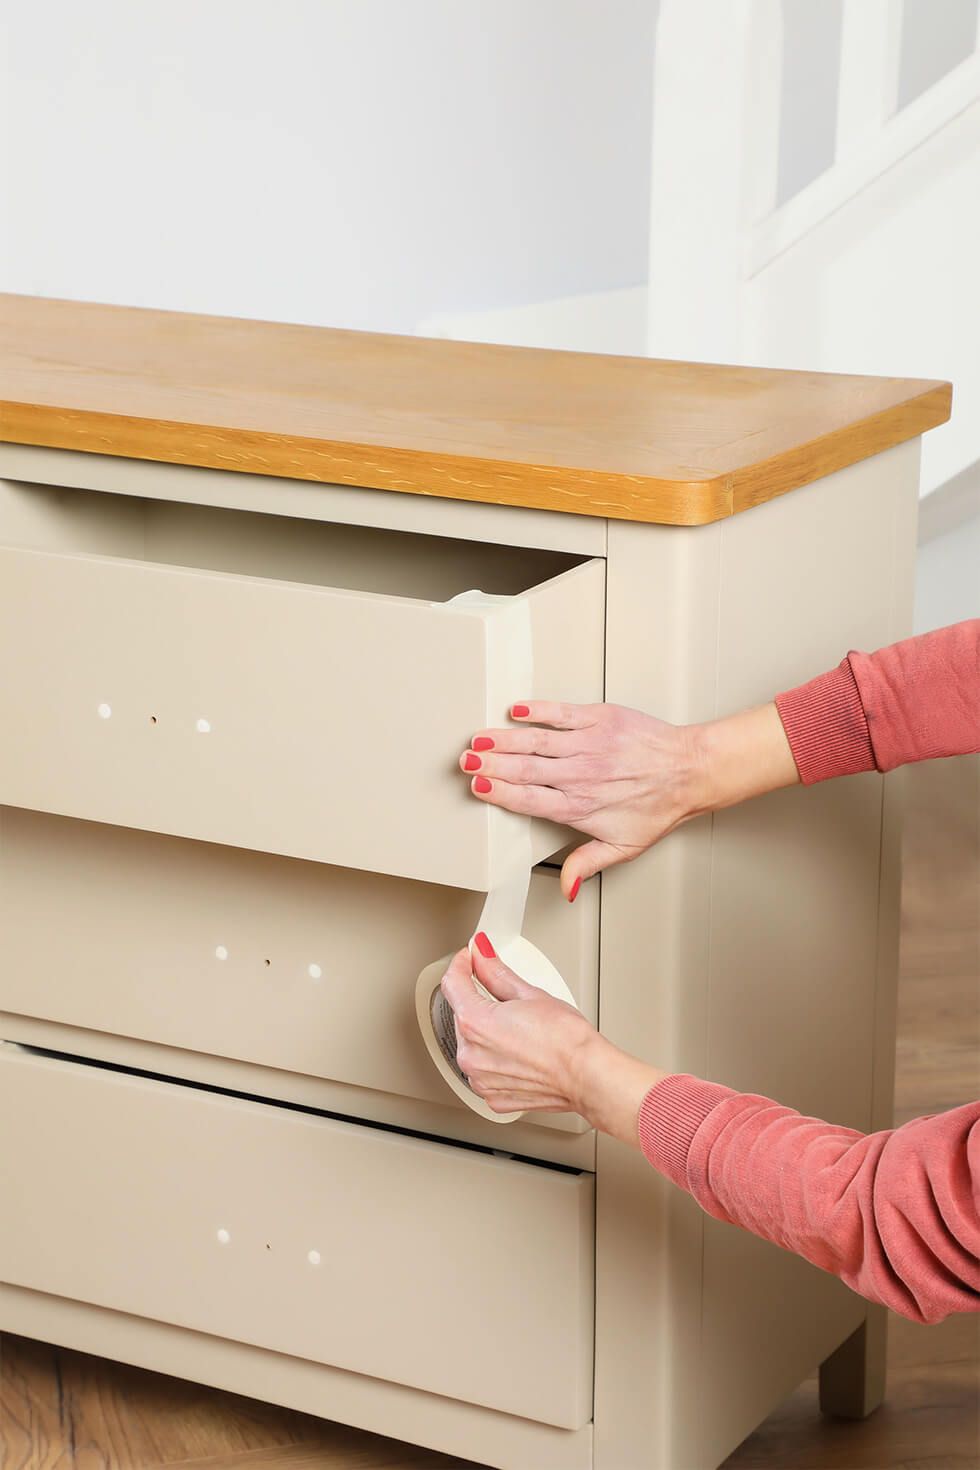 Apply masking tape to the dresser